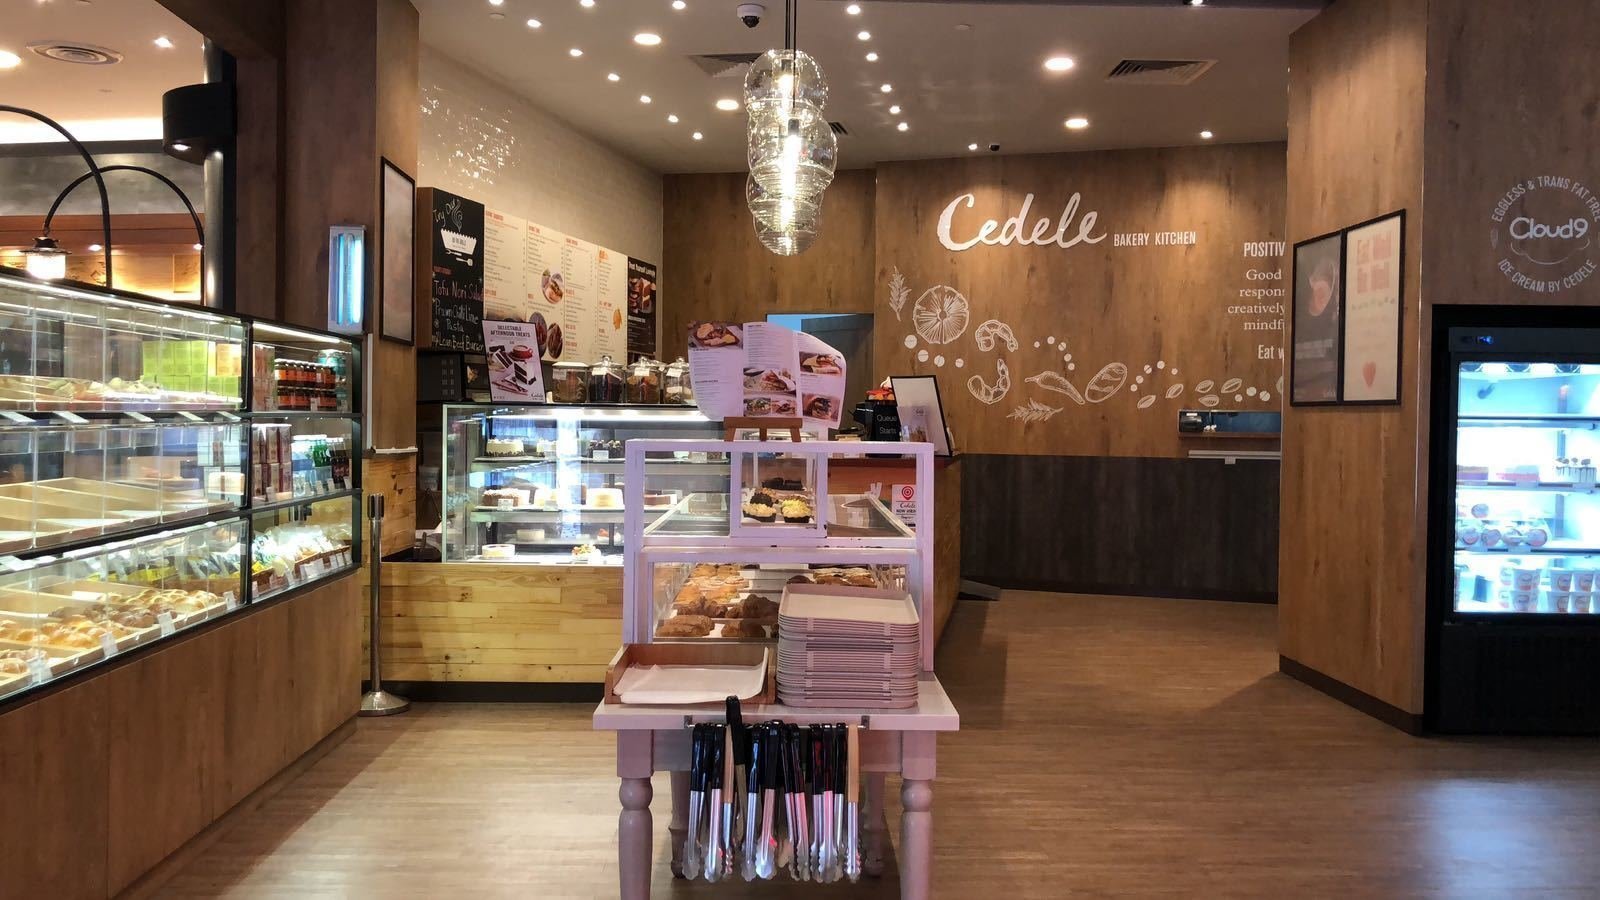 <span class="translation_missing" title="translation missing: en.meta.location_title, location_name: Cedele Bakery Kitchen - Waterway Point, city: Singapore">Location Title</span>